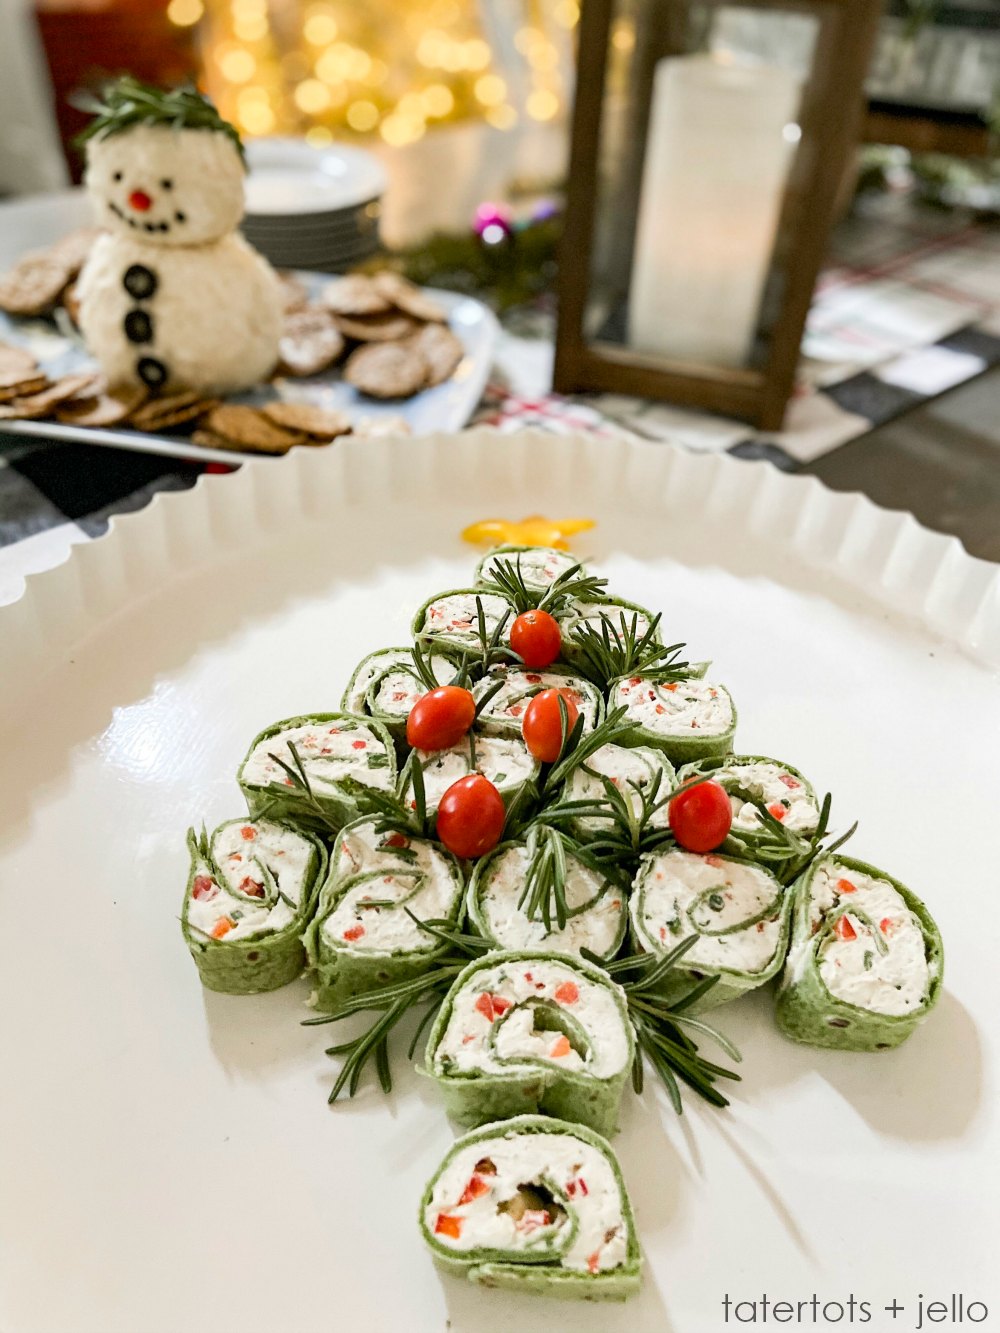 Christmas Party Pinwheel Tree Appetizer. Tis the season for easy appetizers! Whip up these cream cheese and veggie pinwheels, arrange on a platter and garnish with fresh herbs. Then pop them in the fridge until the party starts.